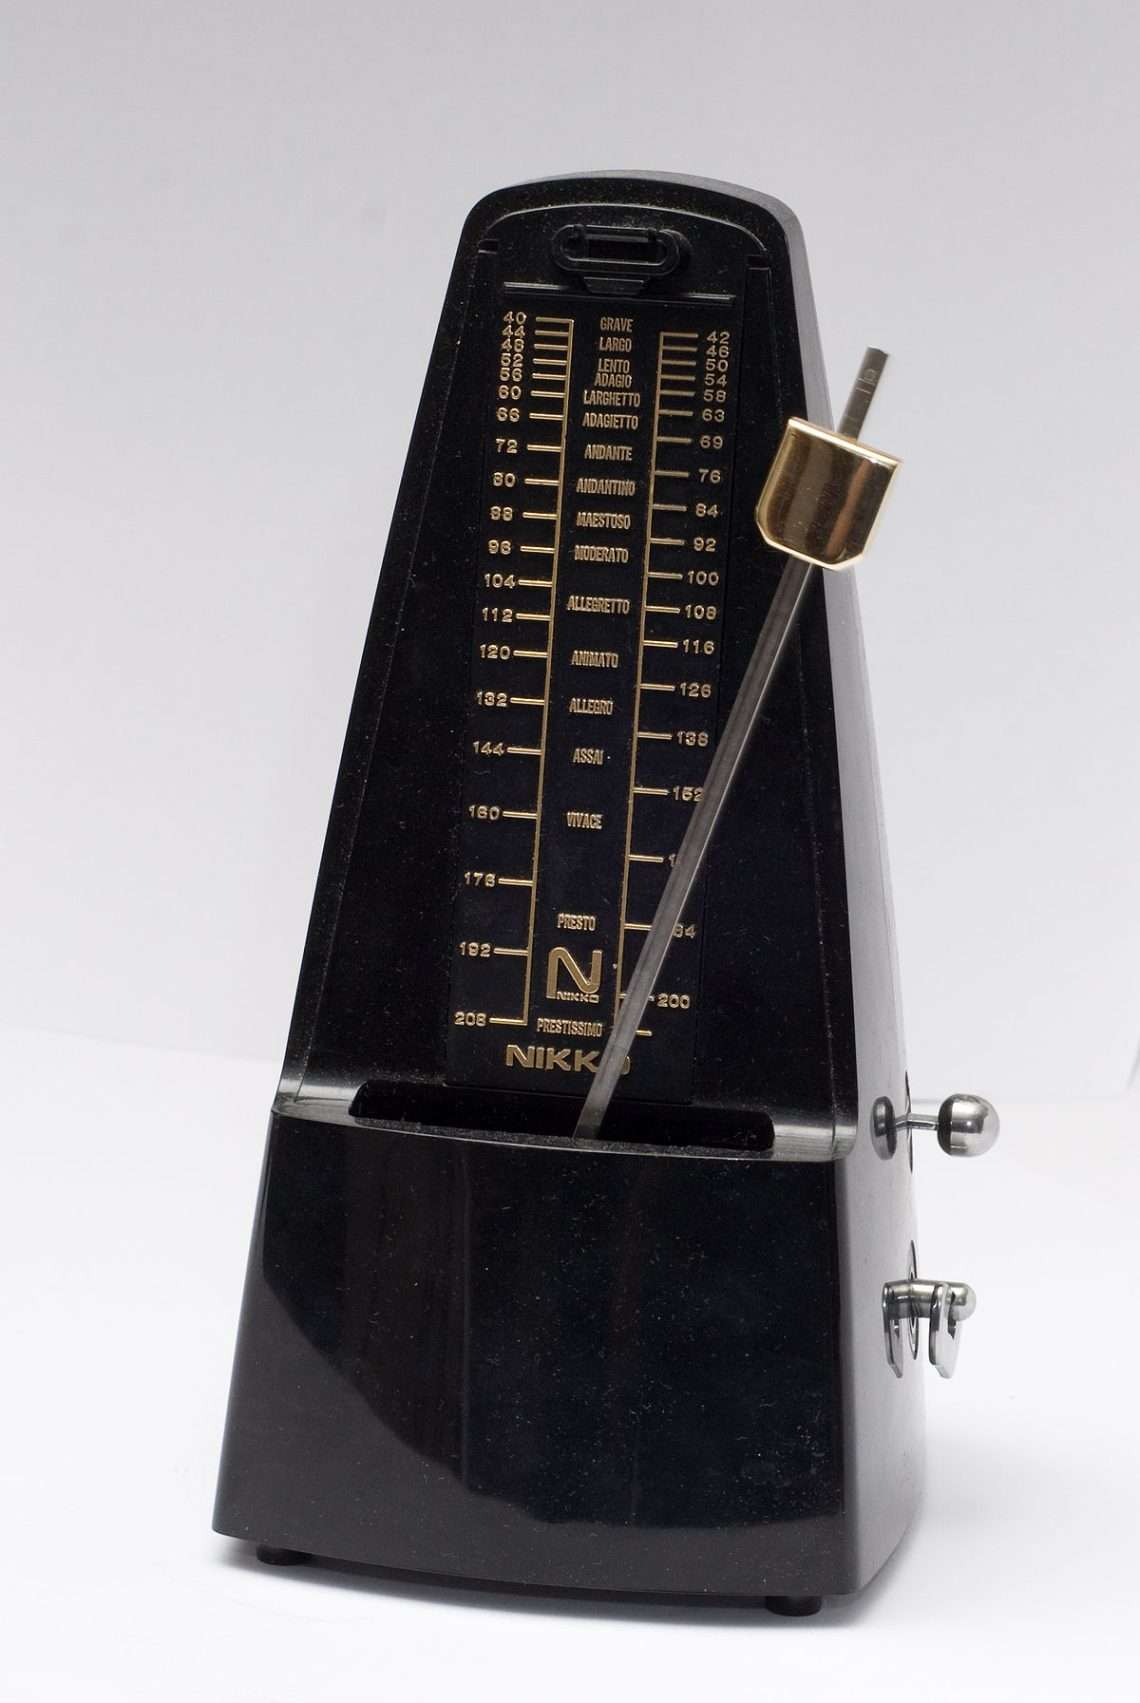 What functions should a metronome have?